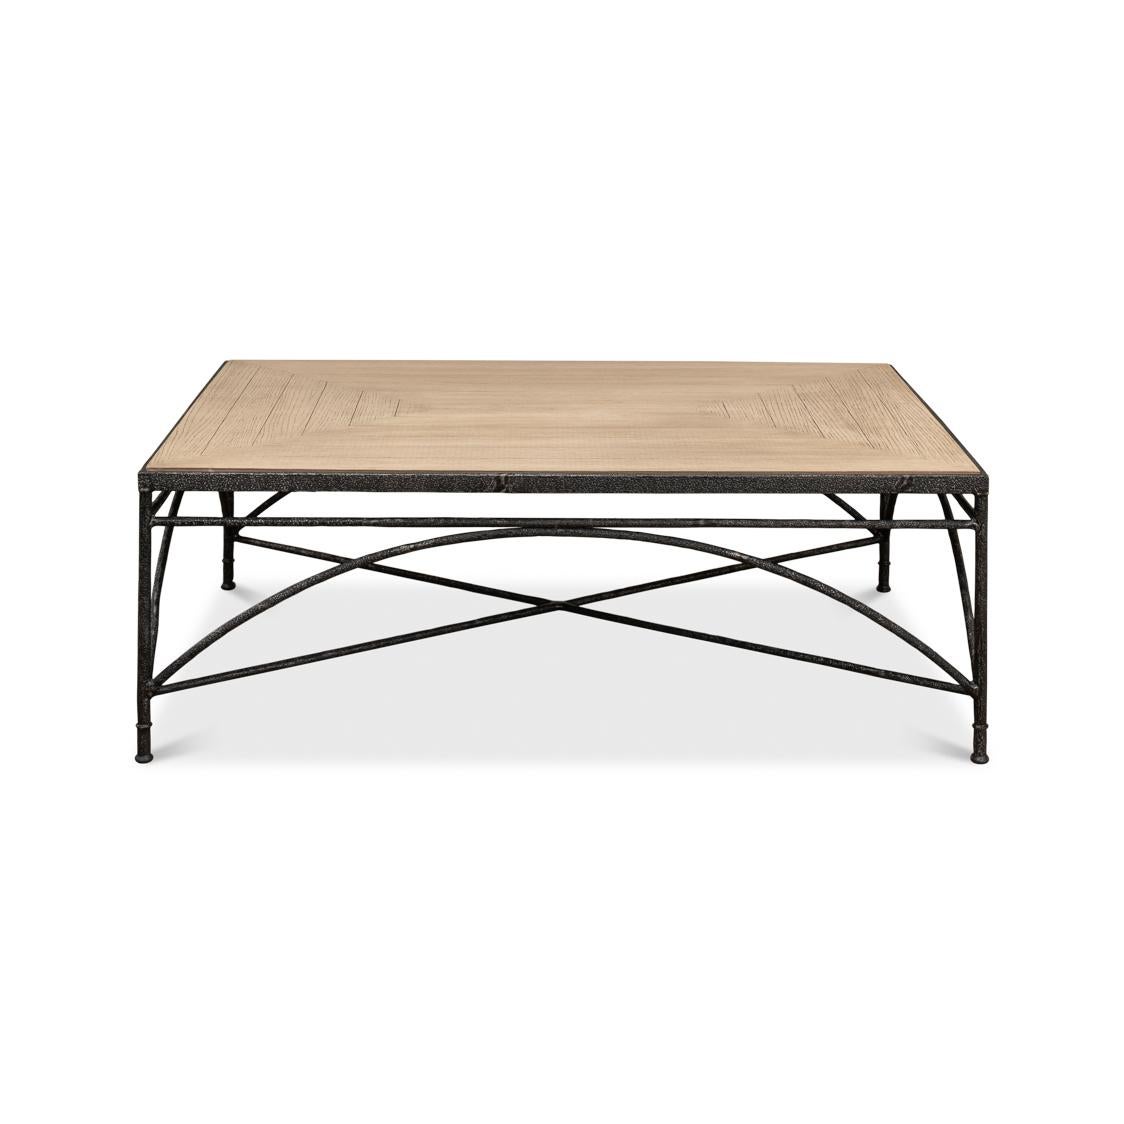 Featuring a light wood color Pine top that offers both durability and a warm, inviting look on an iron base. The robust black metal frame base gives a nod to classic craftsmanship with its intricate cross-bracing detail, promising stability and